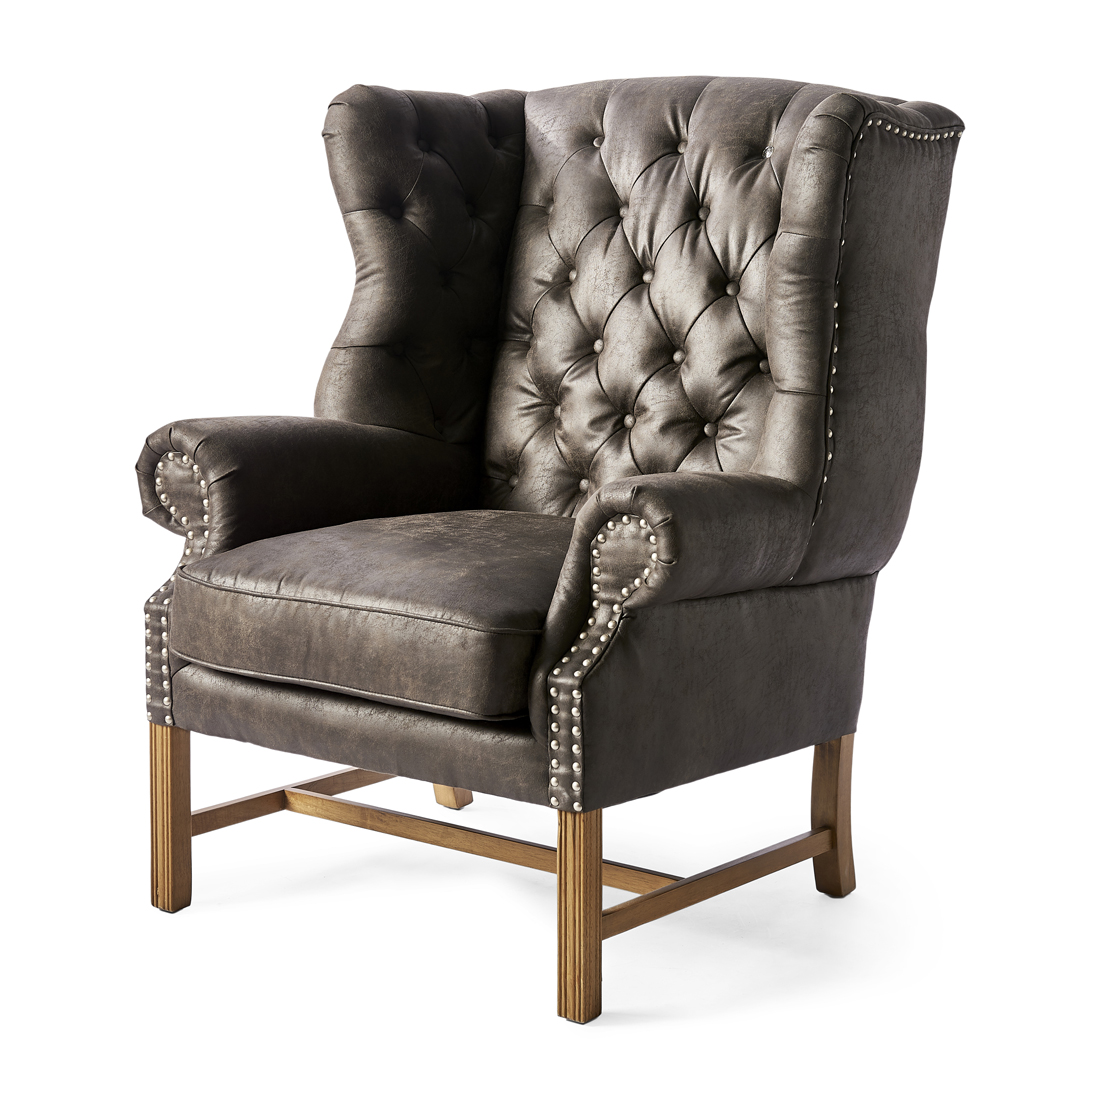 Riviera Maison Fauteuil Met Armleuning - Franklin Park Wing Chair  - Bruin